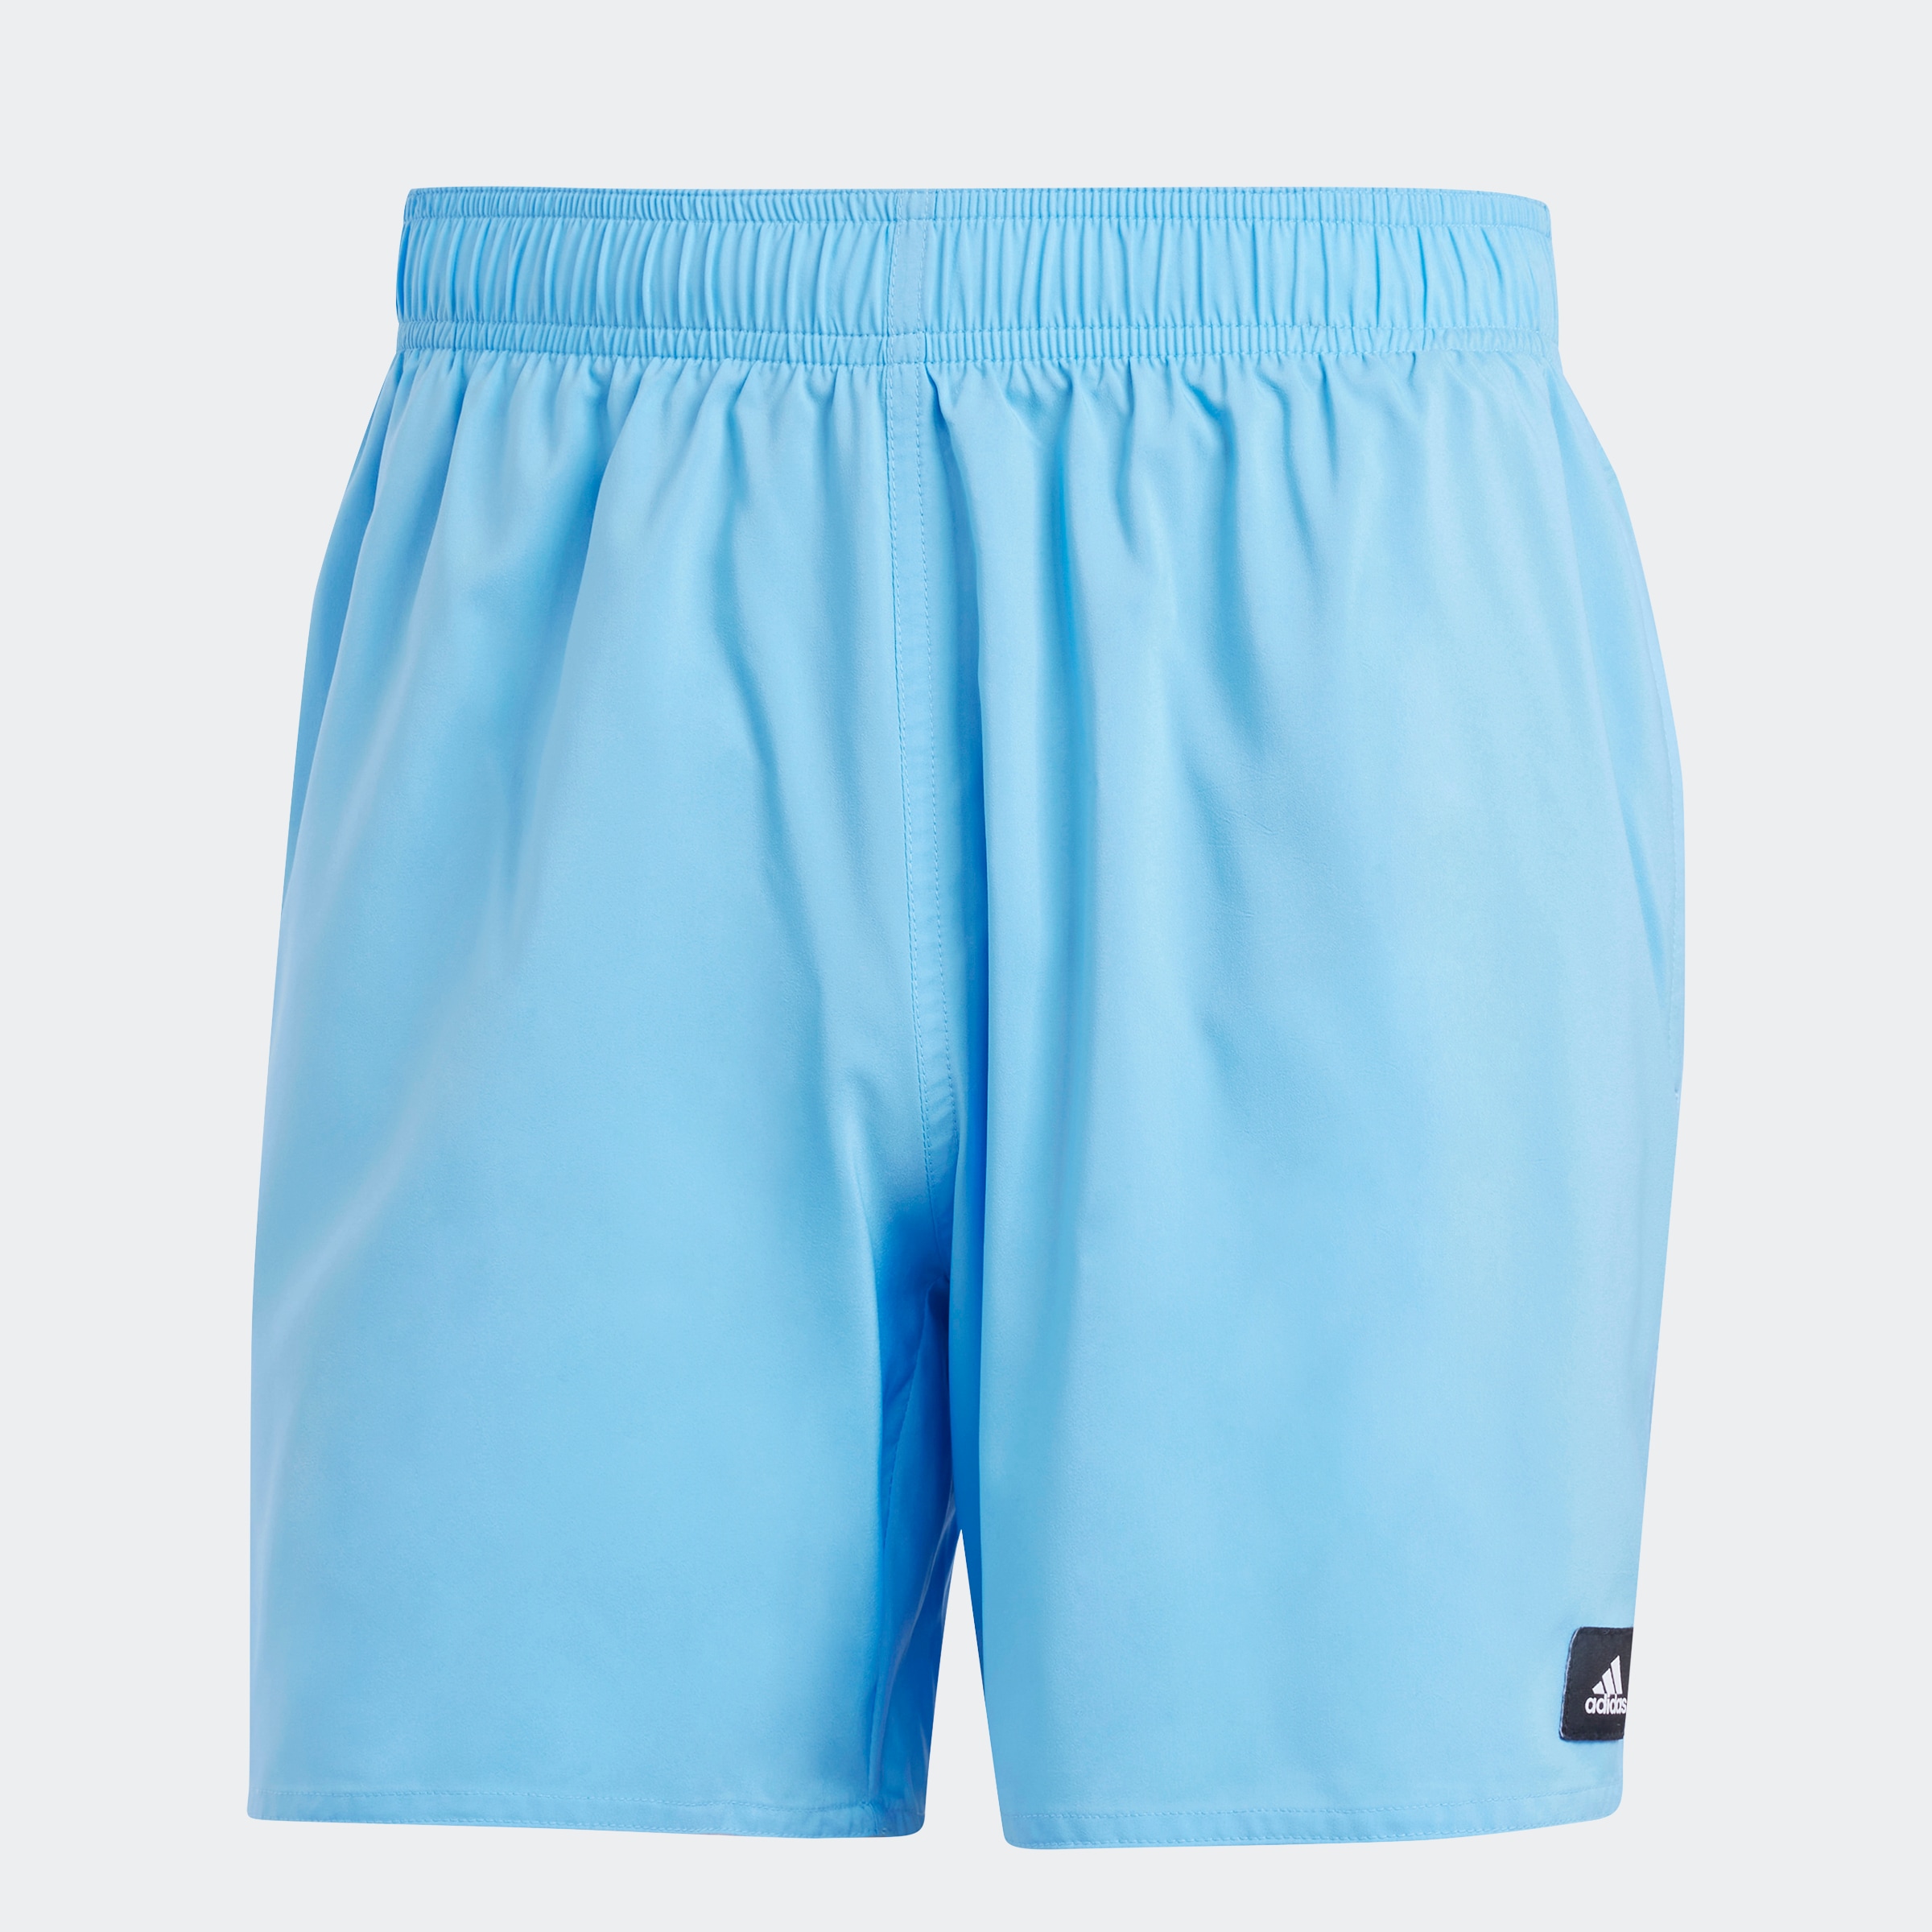 adidas Performance Badehose »SOLID CLX SHORTLENGTH«, (1 St.)